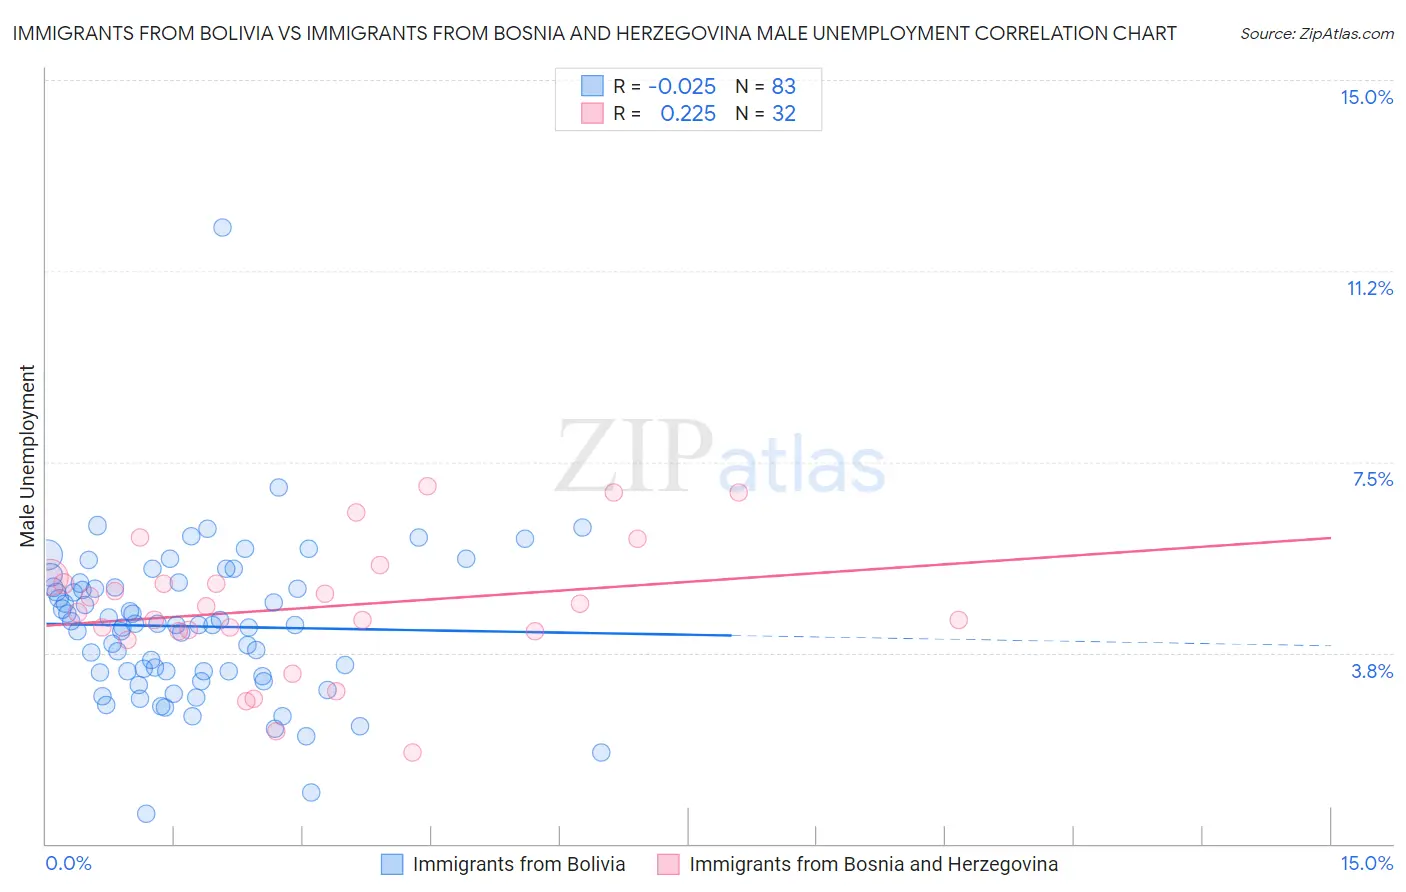 Immigrants from Bolivia vs Immigrants from Bosnia and Herzegovina Male Unemployment